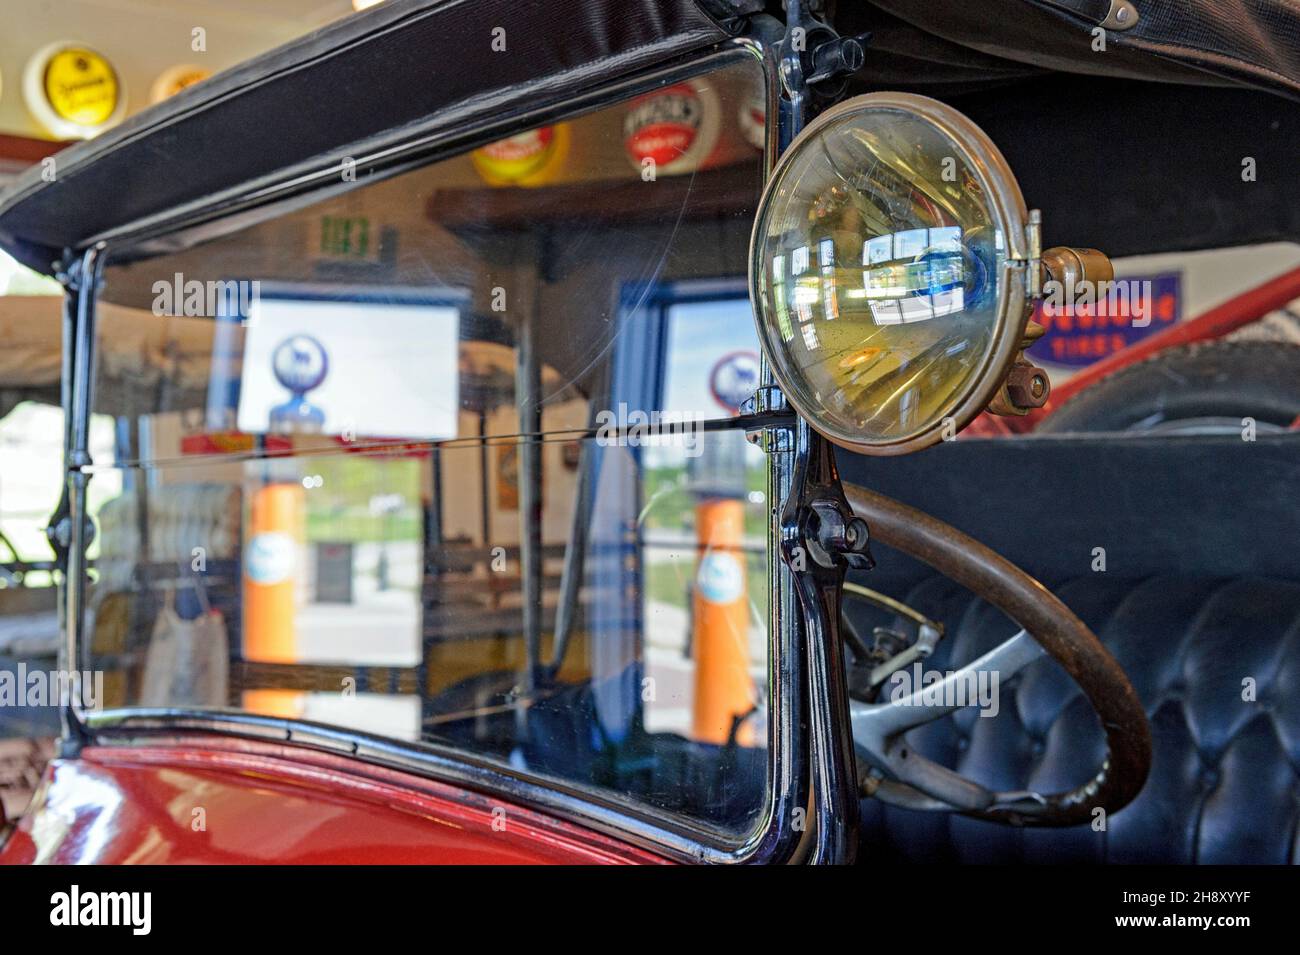 A 1920s open-topped Oldsmobile antique roadster car at a service station garage Stock Photo